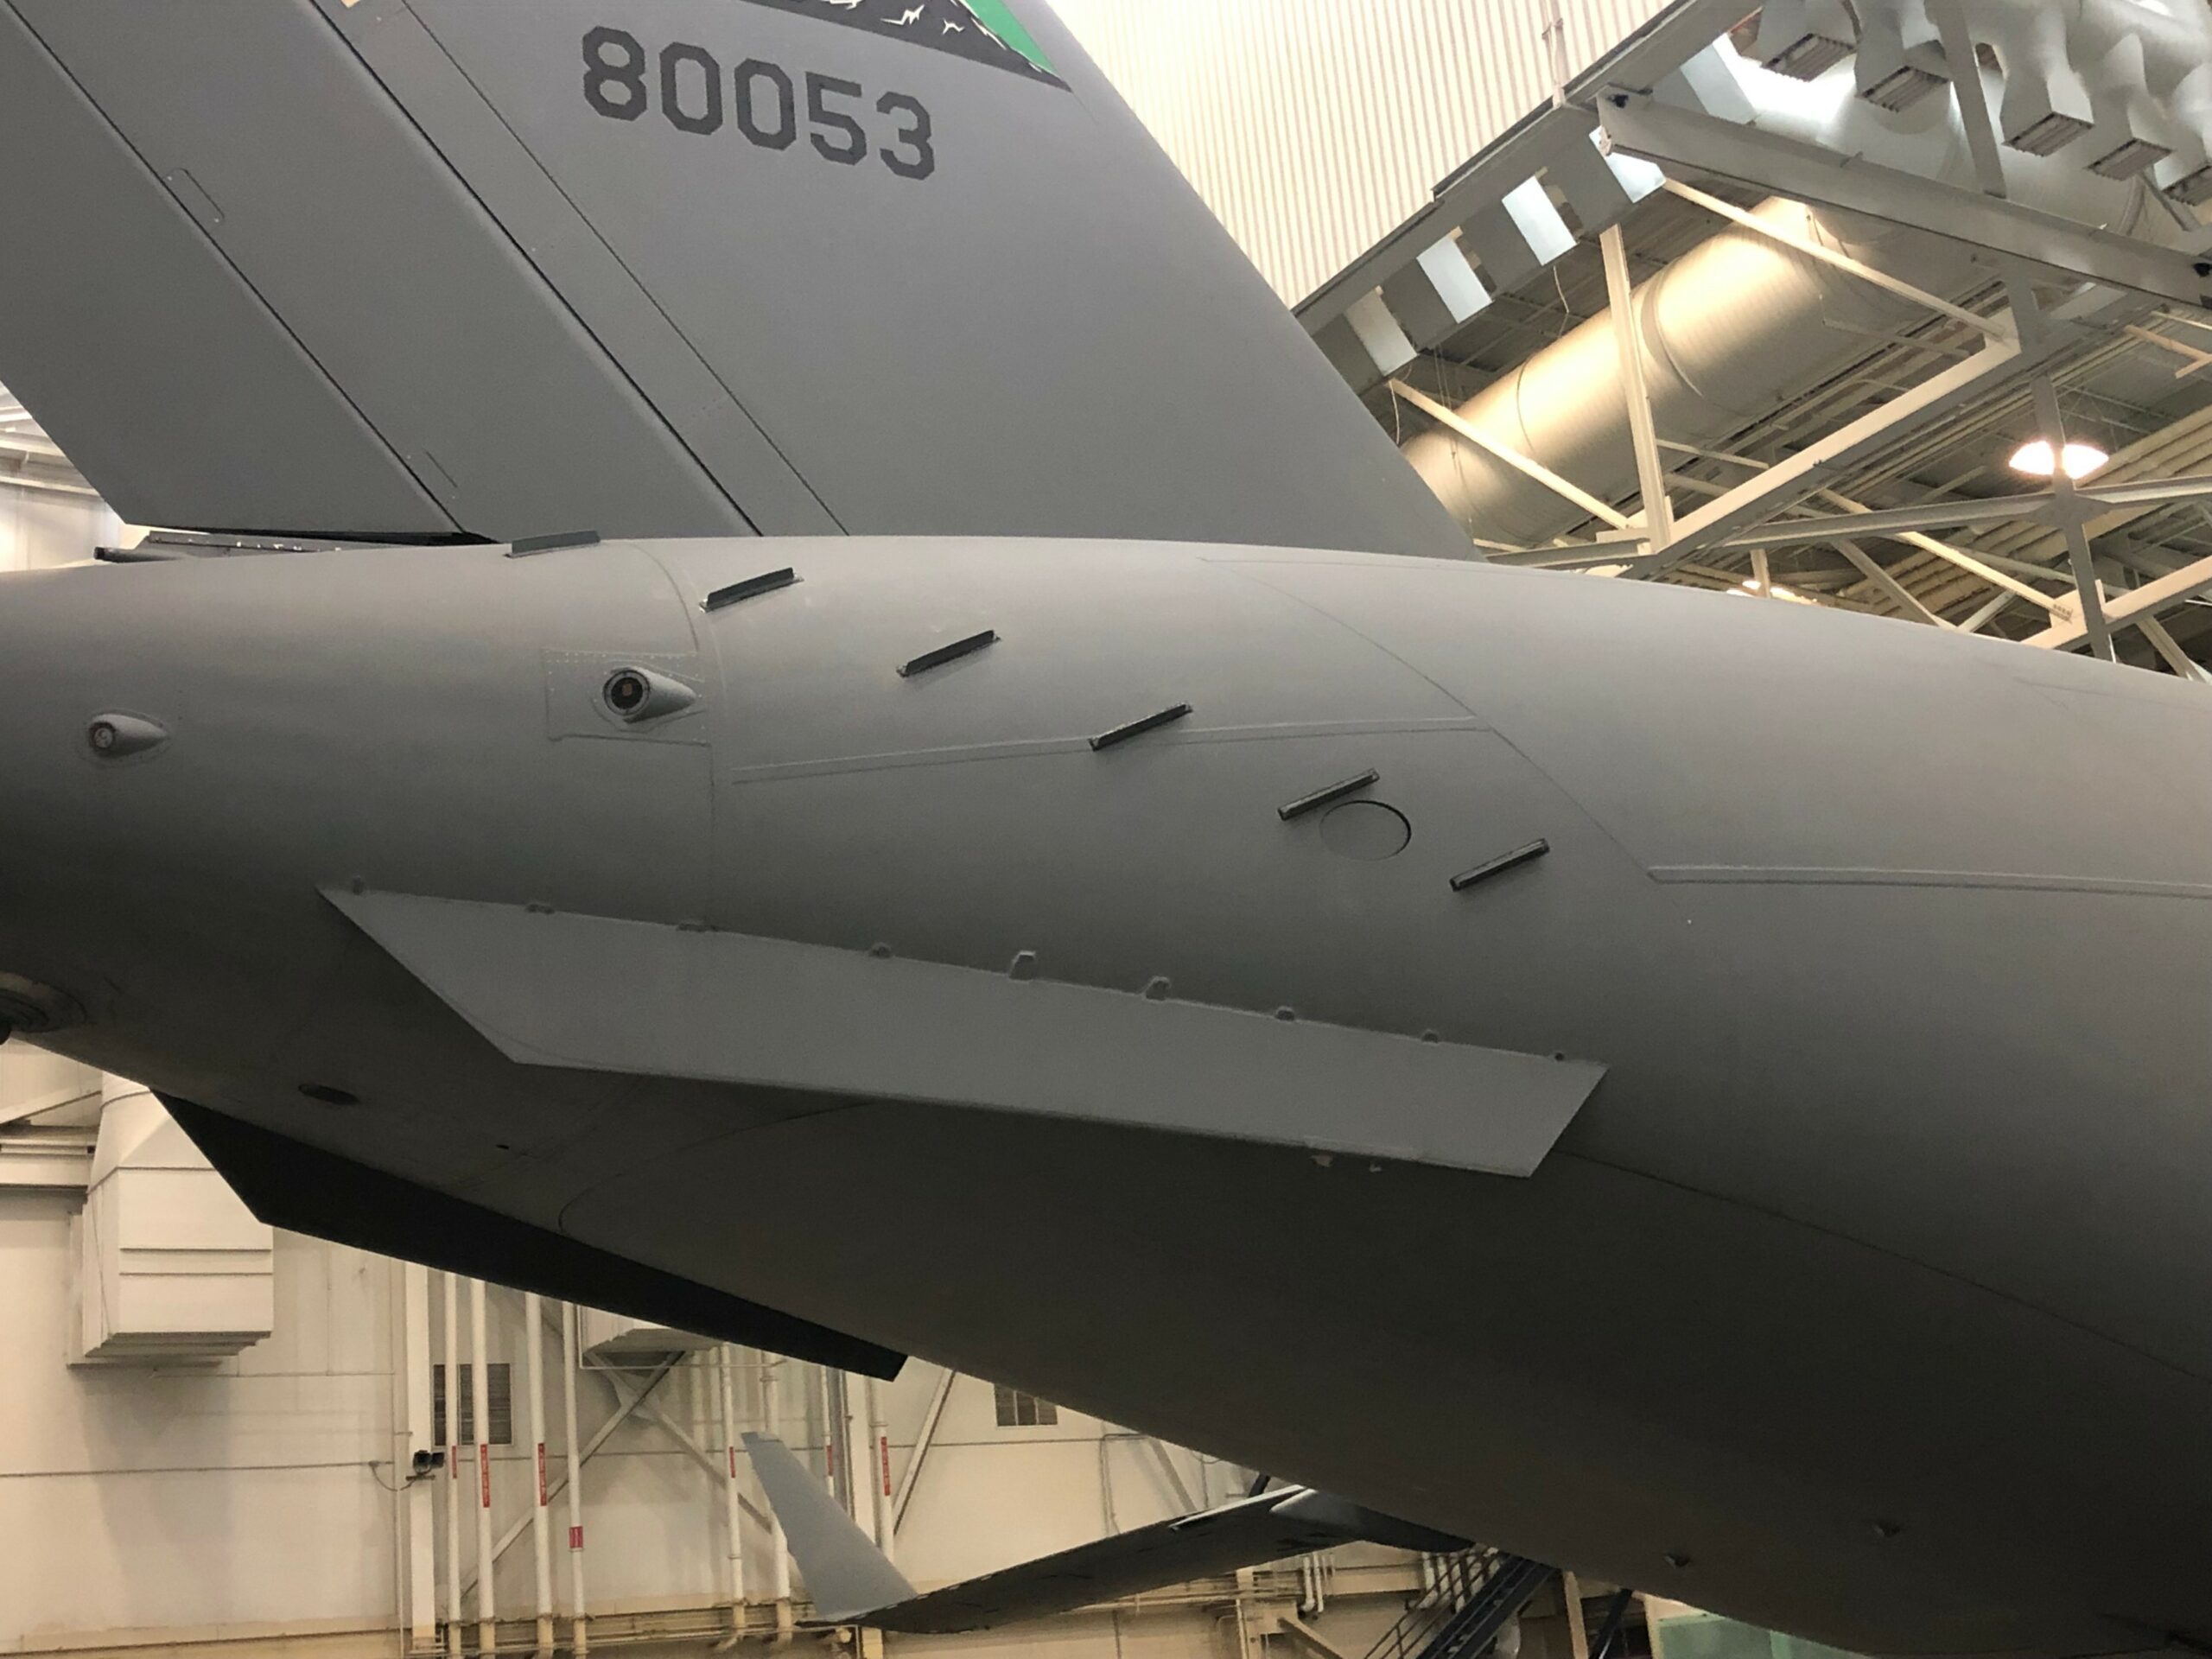 The drag reduction devices known as microvanes are shown on the aft-end of a C-17 Globemaster III